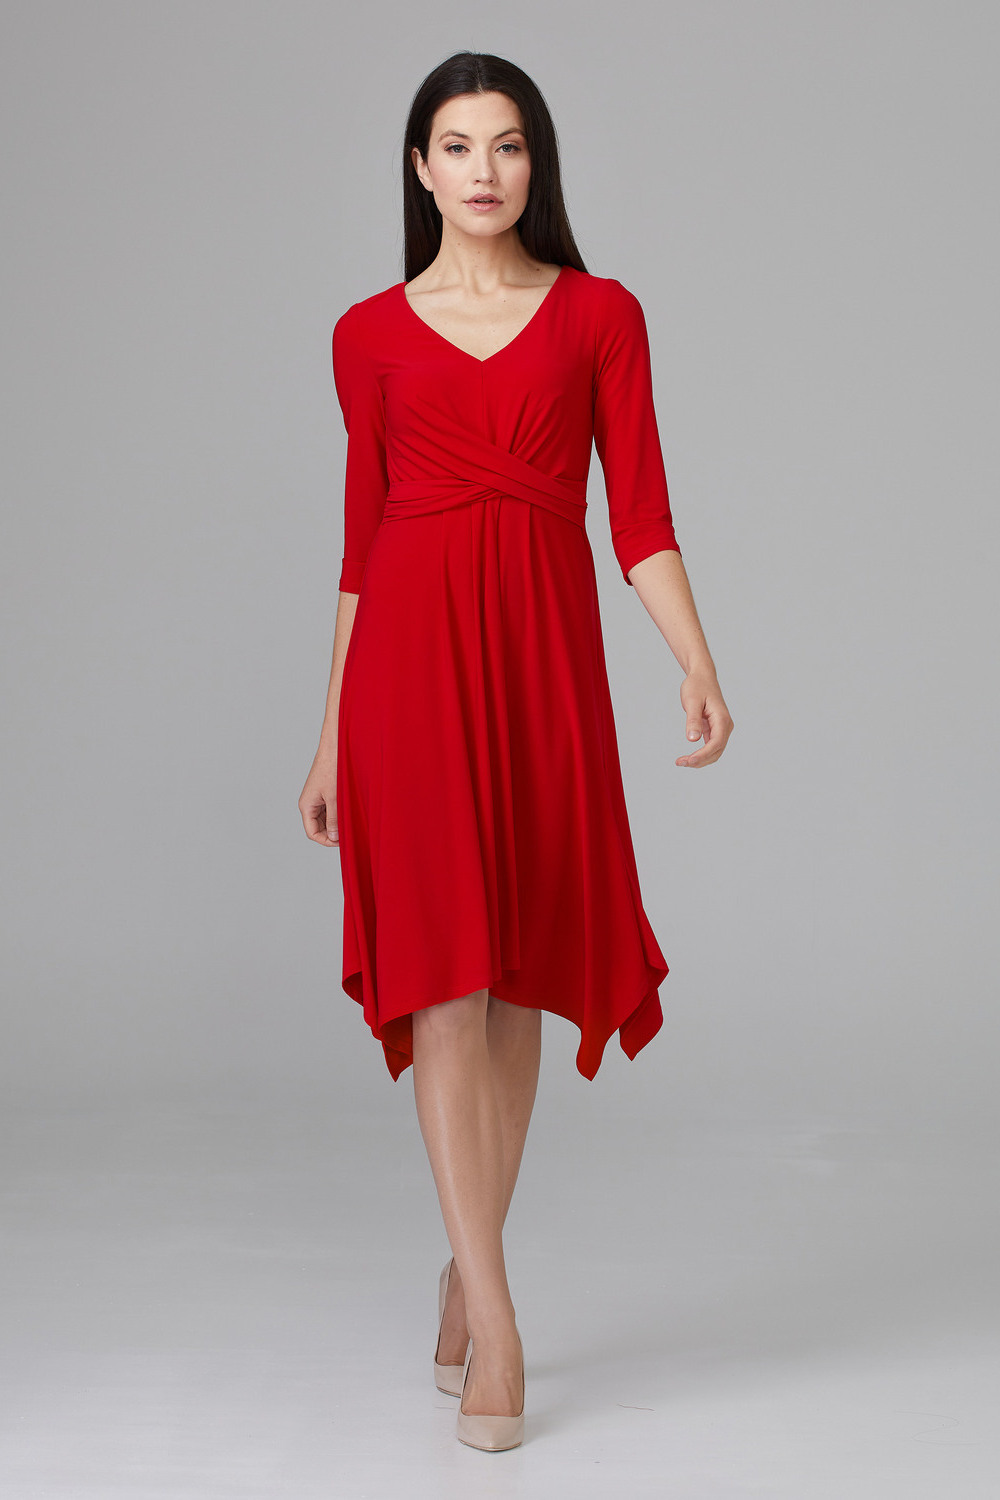 Joseph Ribkoff robe style 201295. Rouge A Levres 173